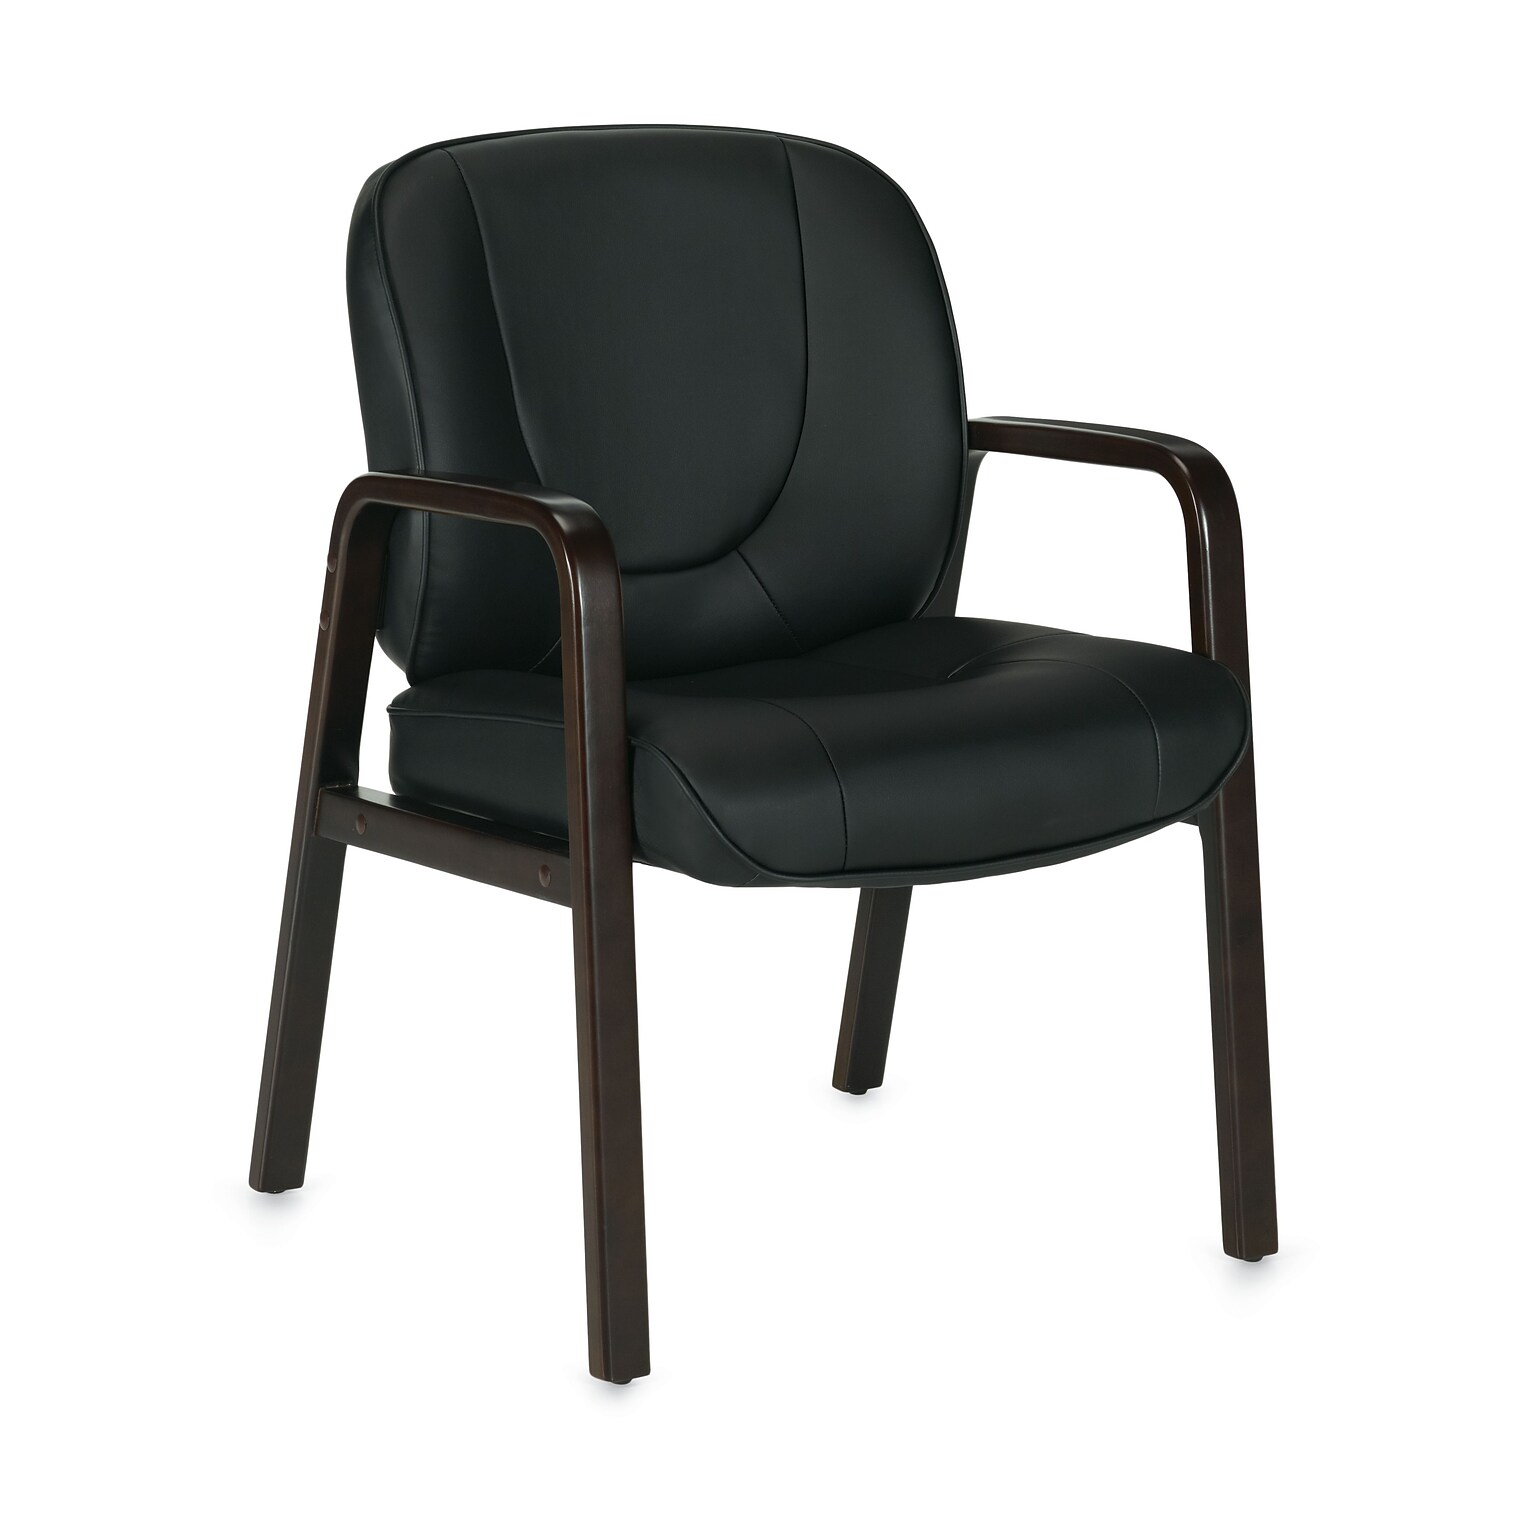 Offices To Go Luxhide Guest Chair with Wood Accents, Black (OTG11770BES)